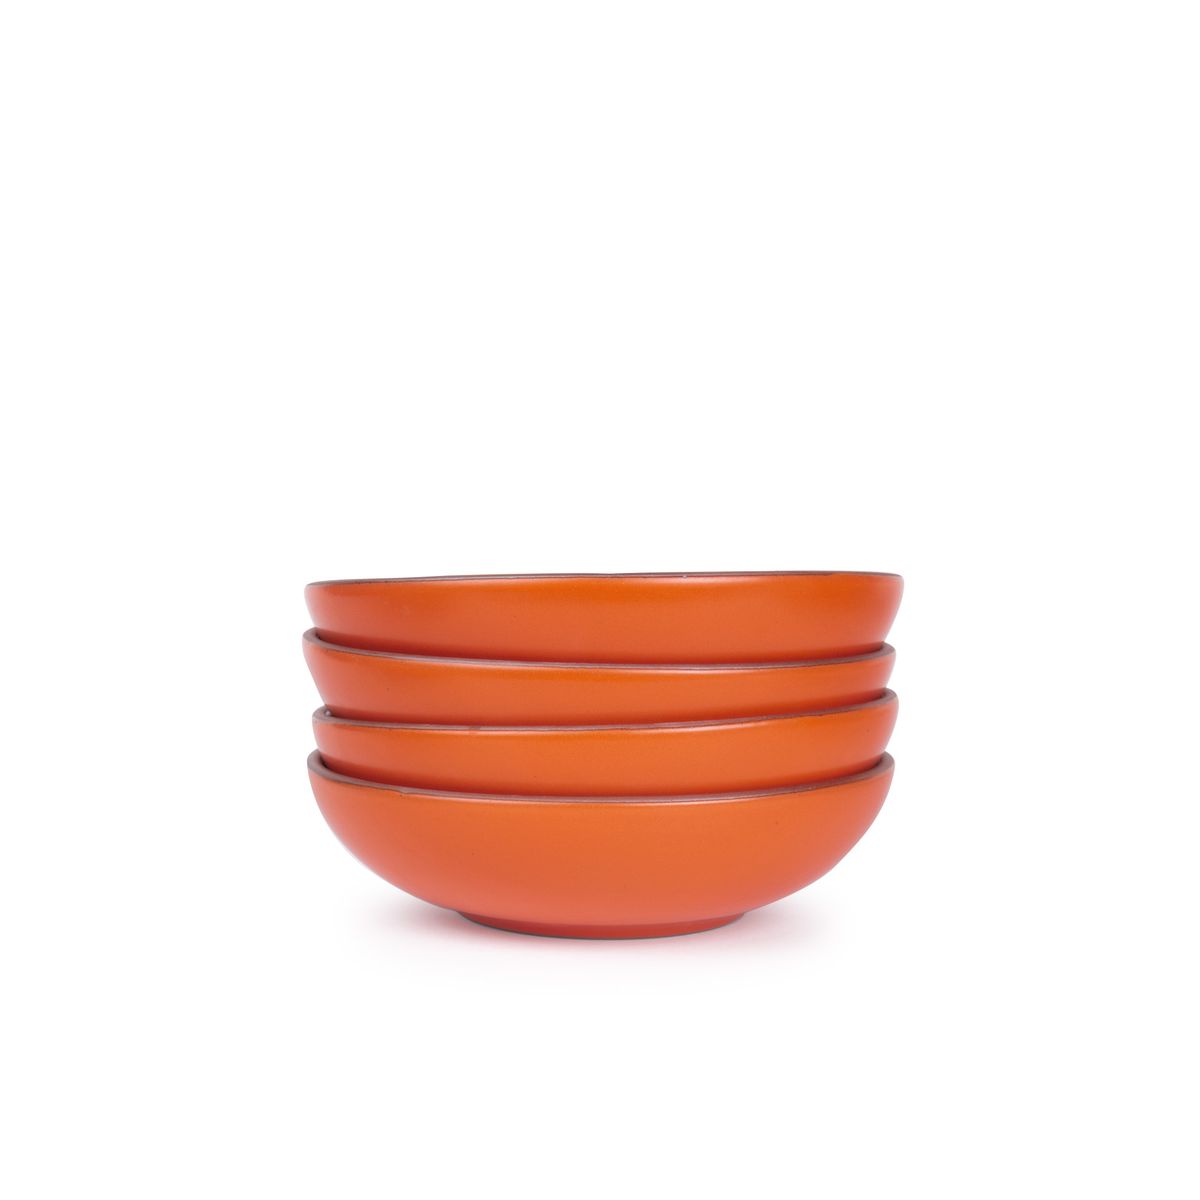 A stack of 4 dinner-sized shallow ceramic bowls in a bold orange color featuring iron speckles and an unglazed rim